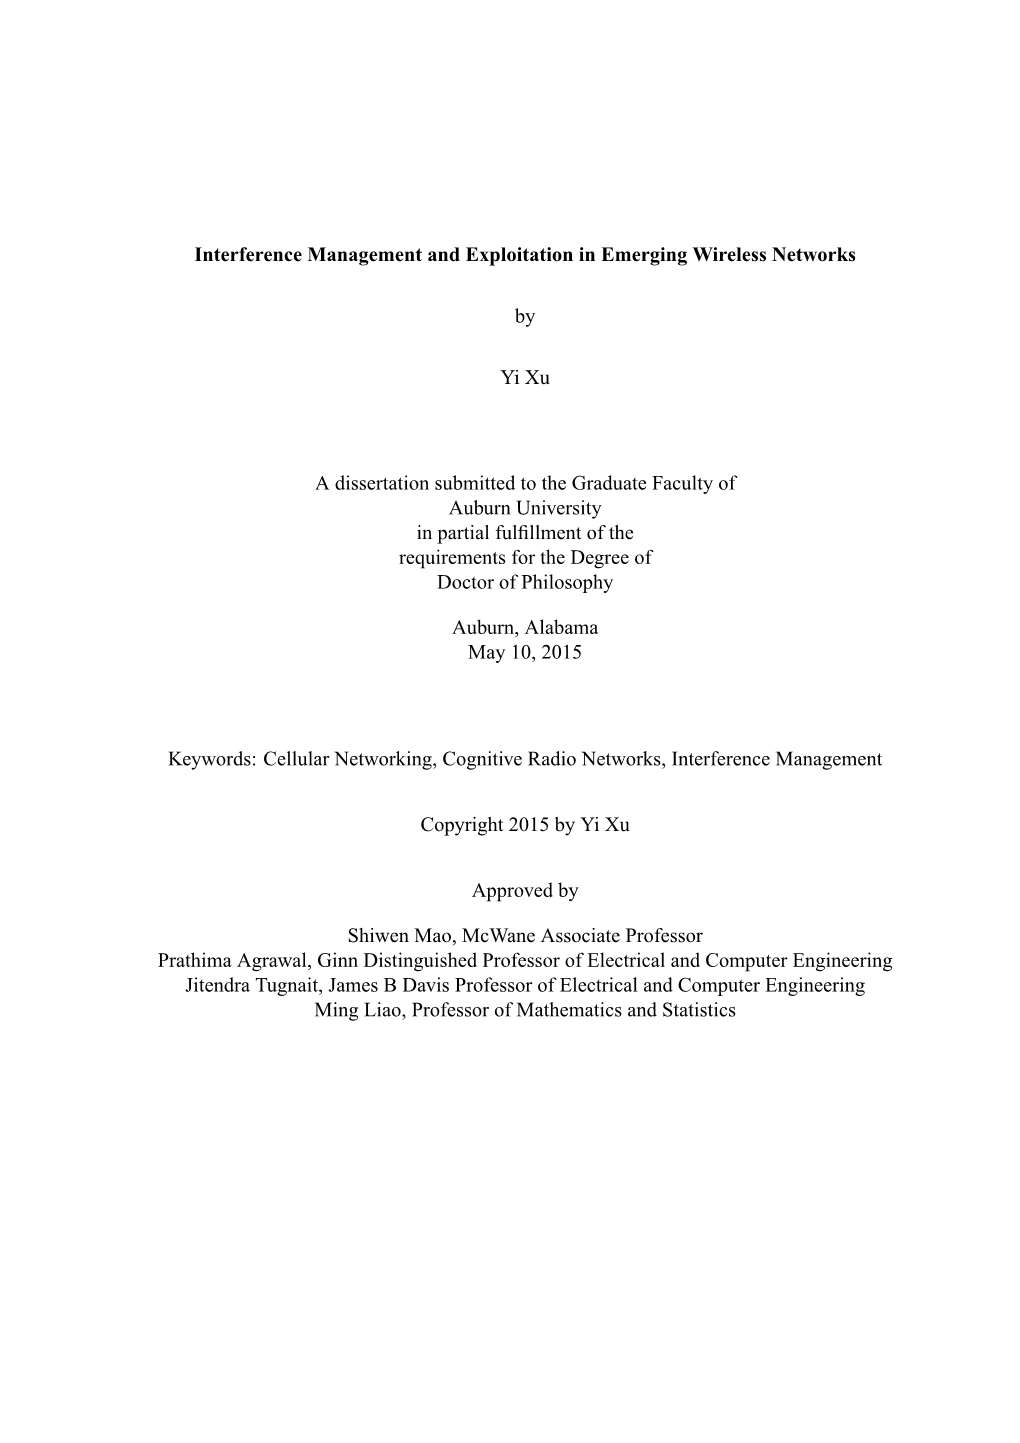 Interference Management and Exploitation in Emerging Wireless Networks